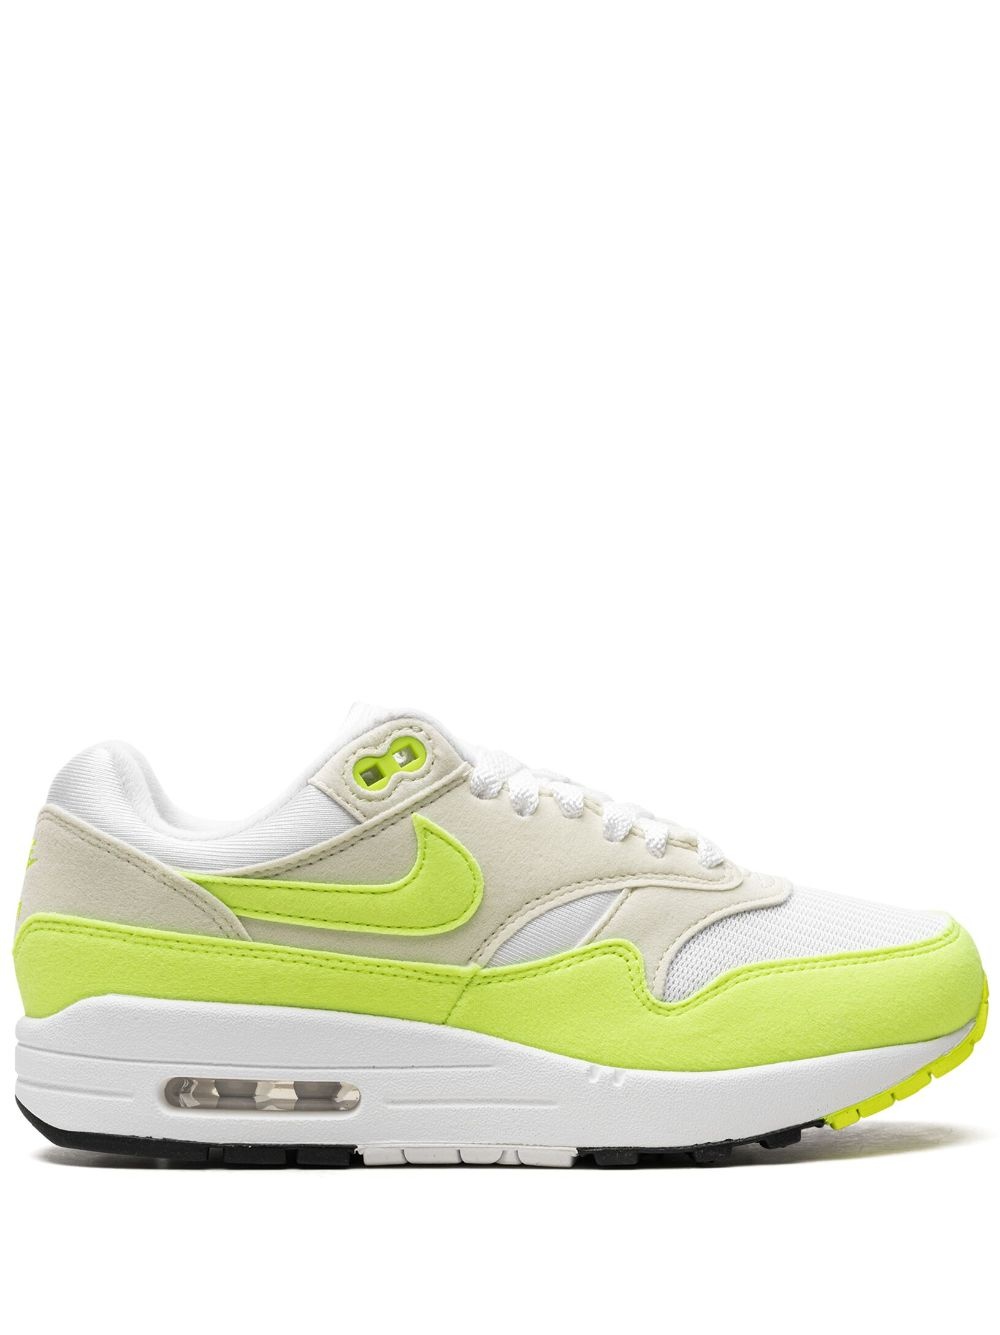 Air Max 1 "Volt Suede" sneakers - 1